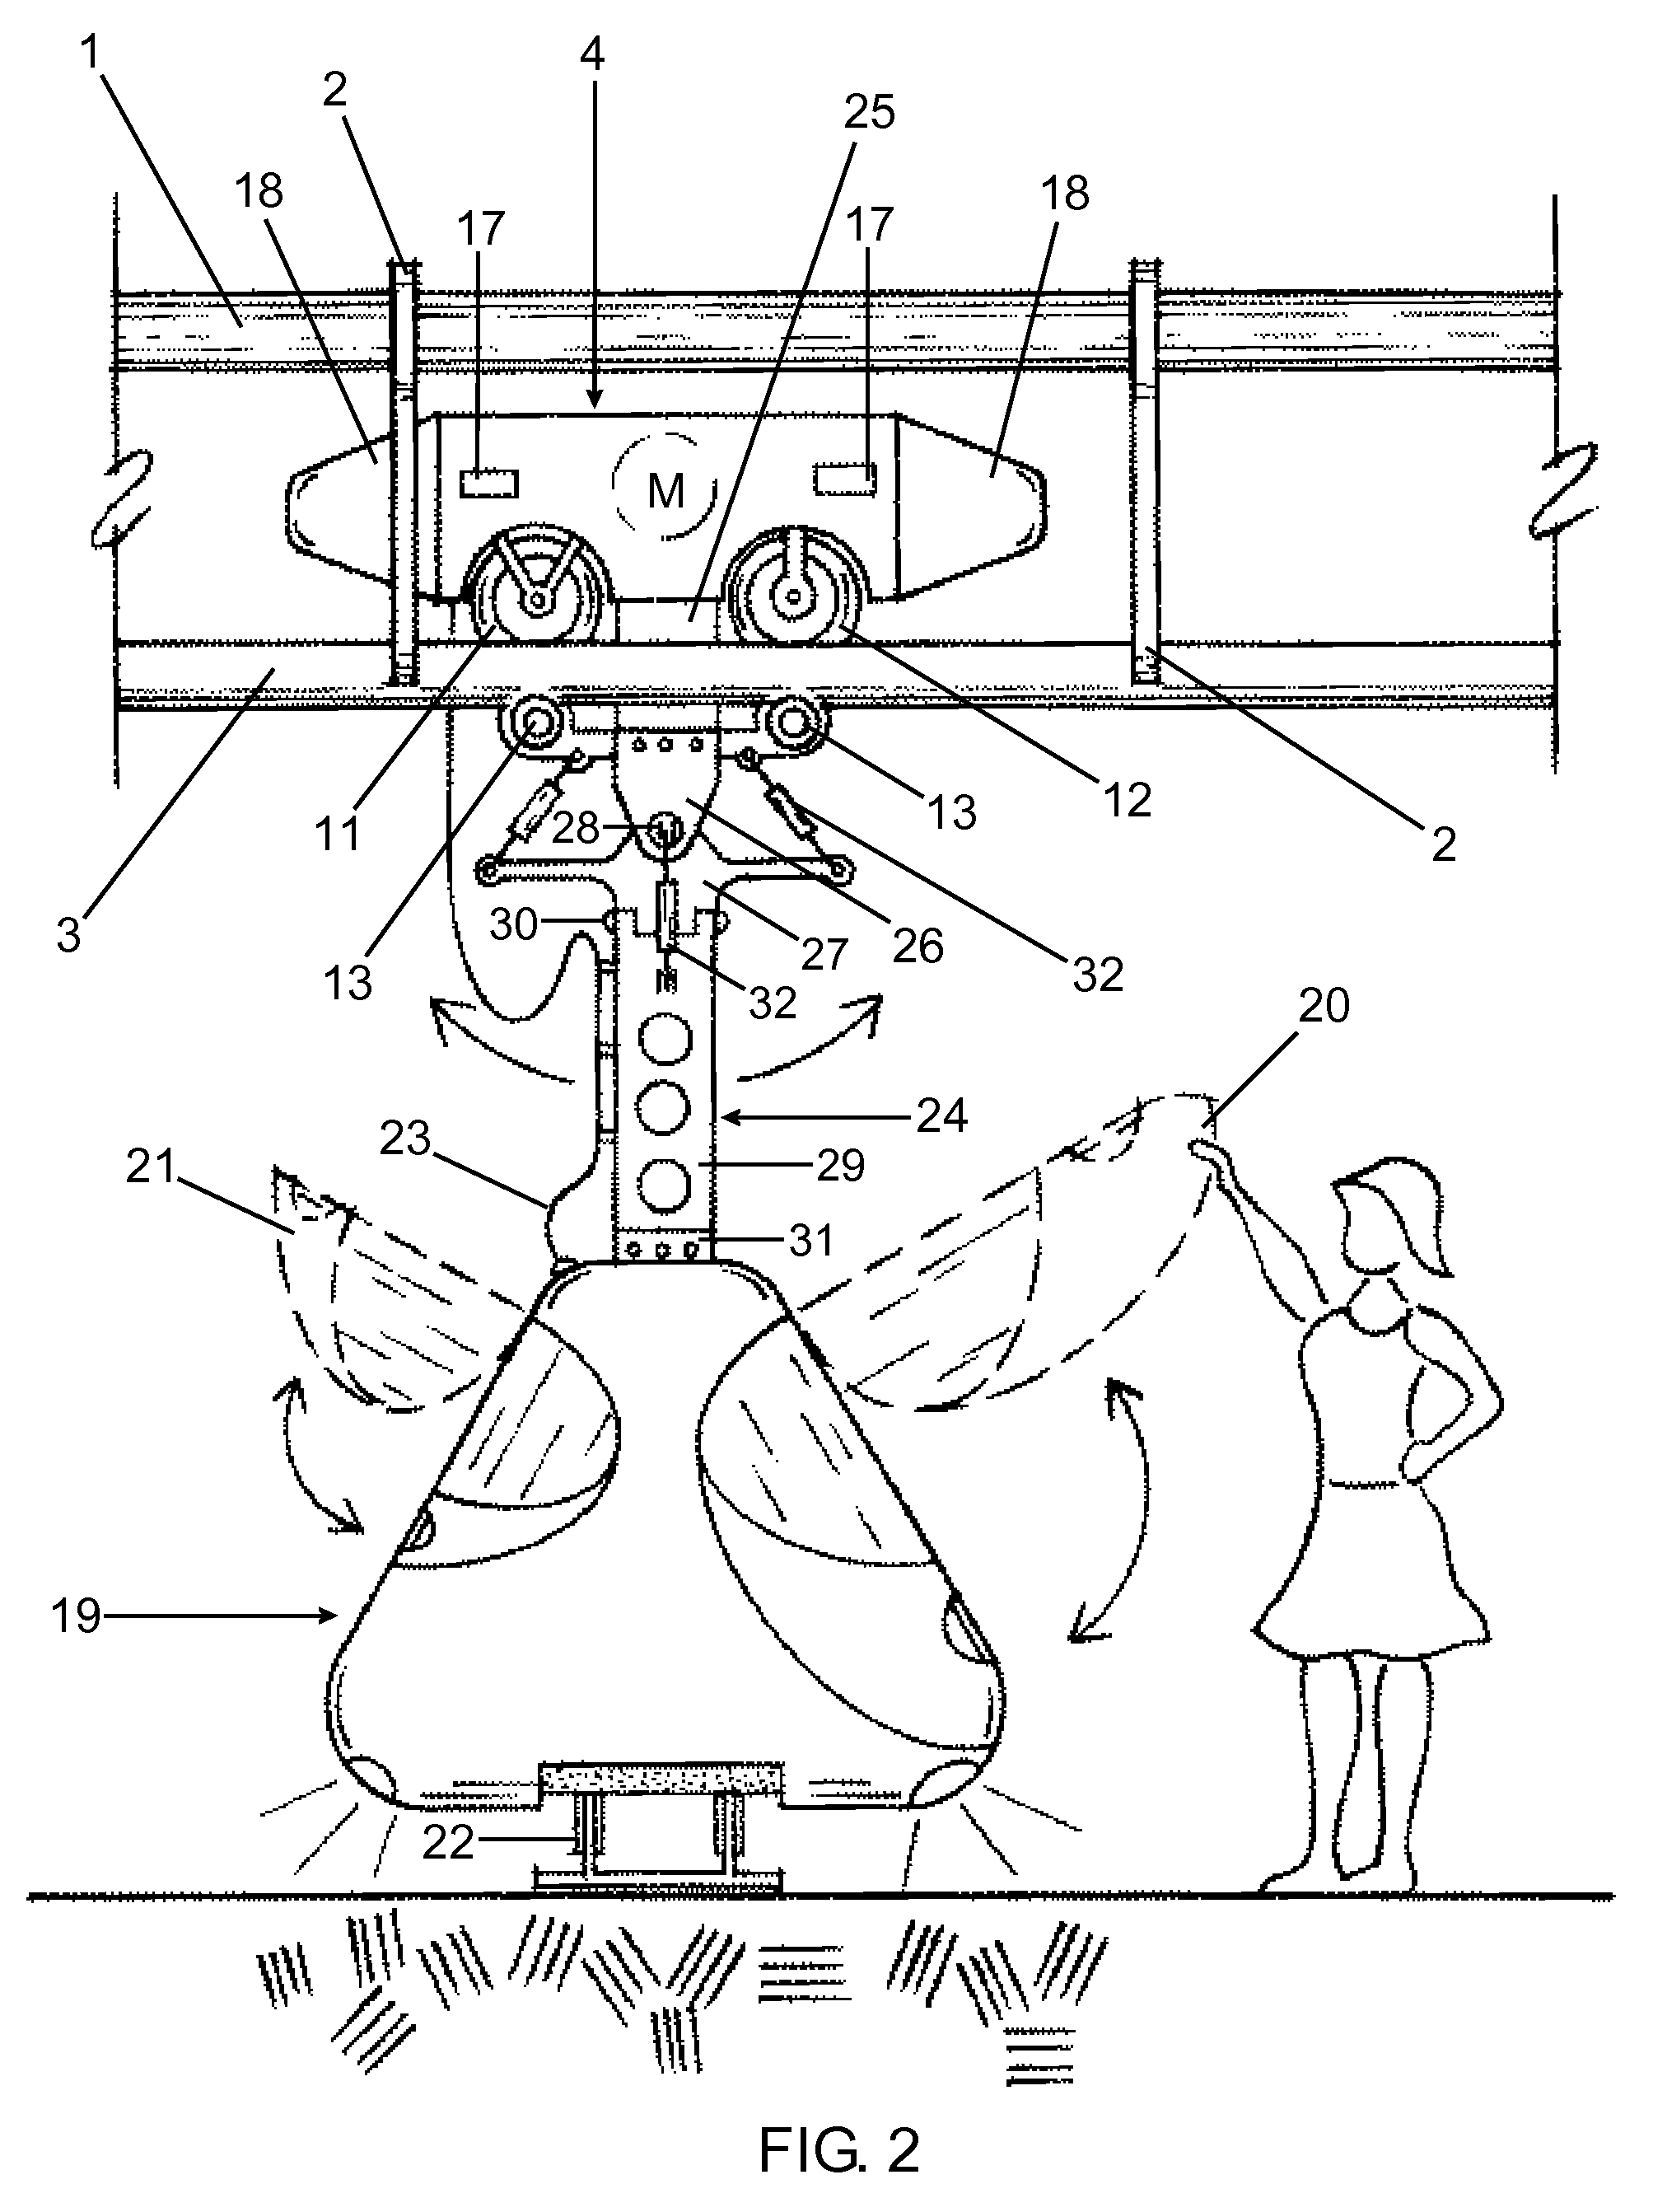 Overhead suspended personal transportation and freight delivery surface transportation system